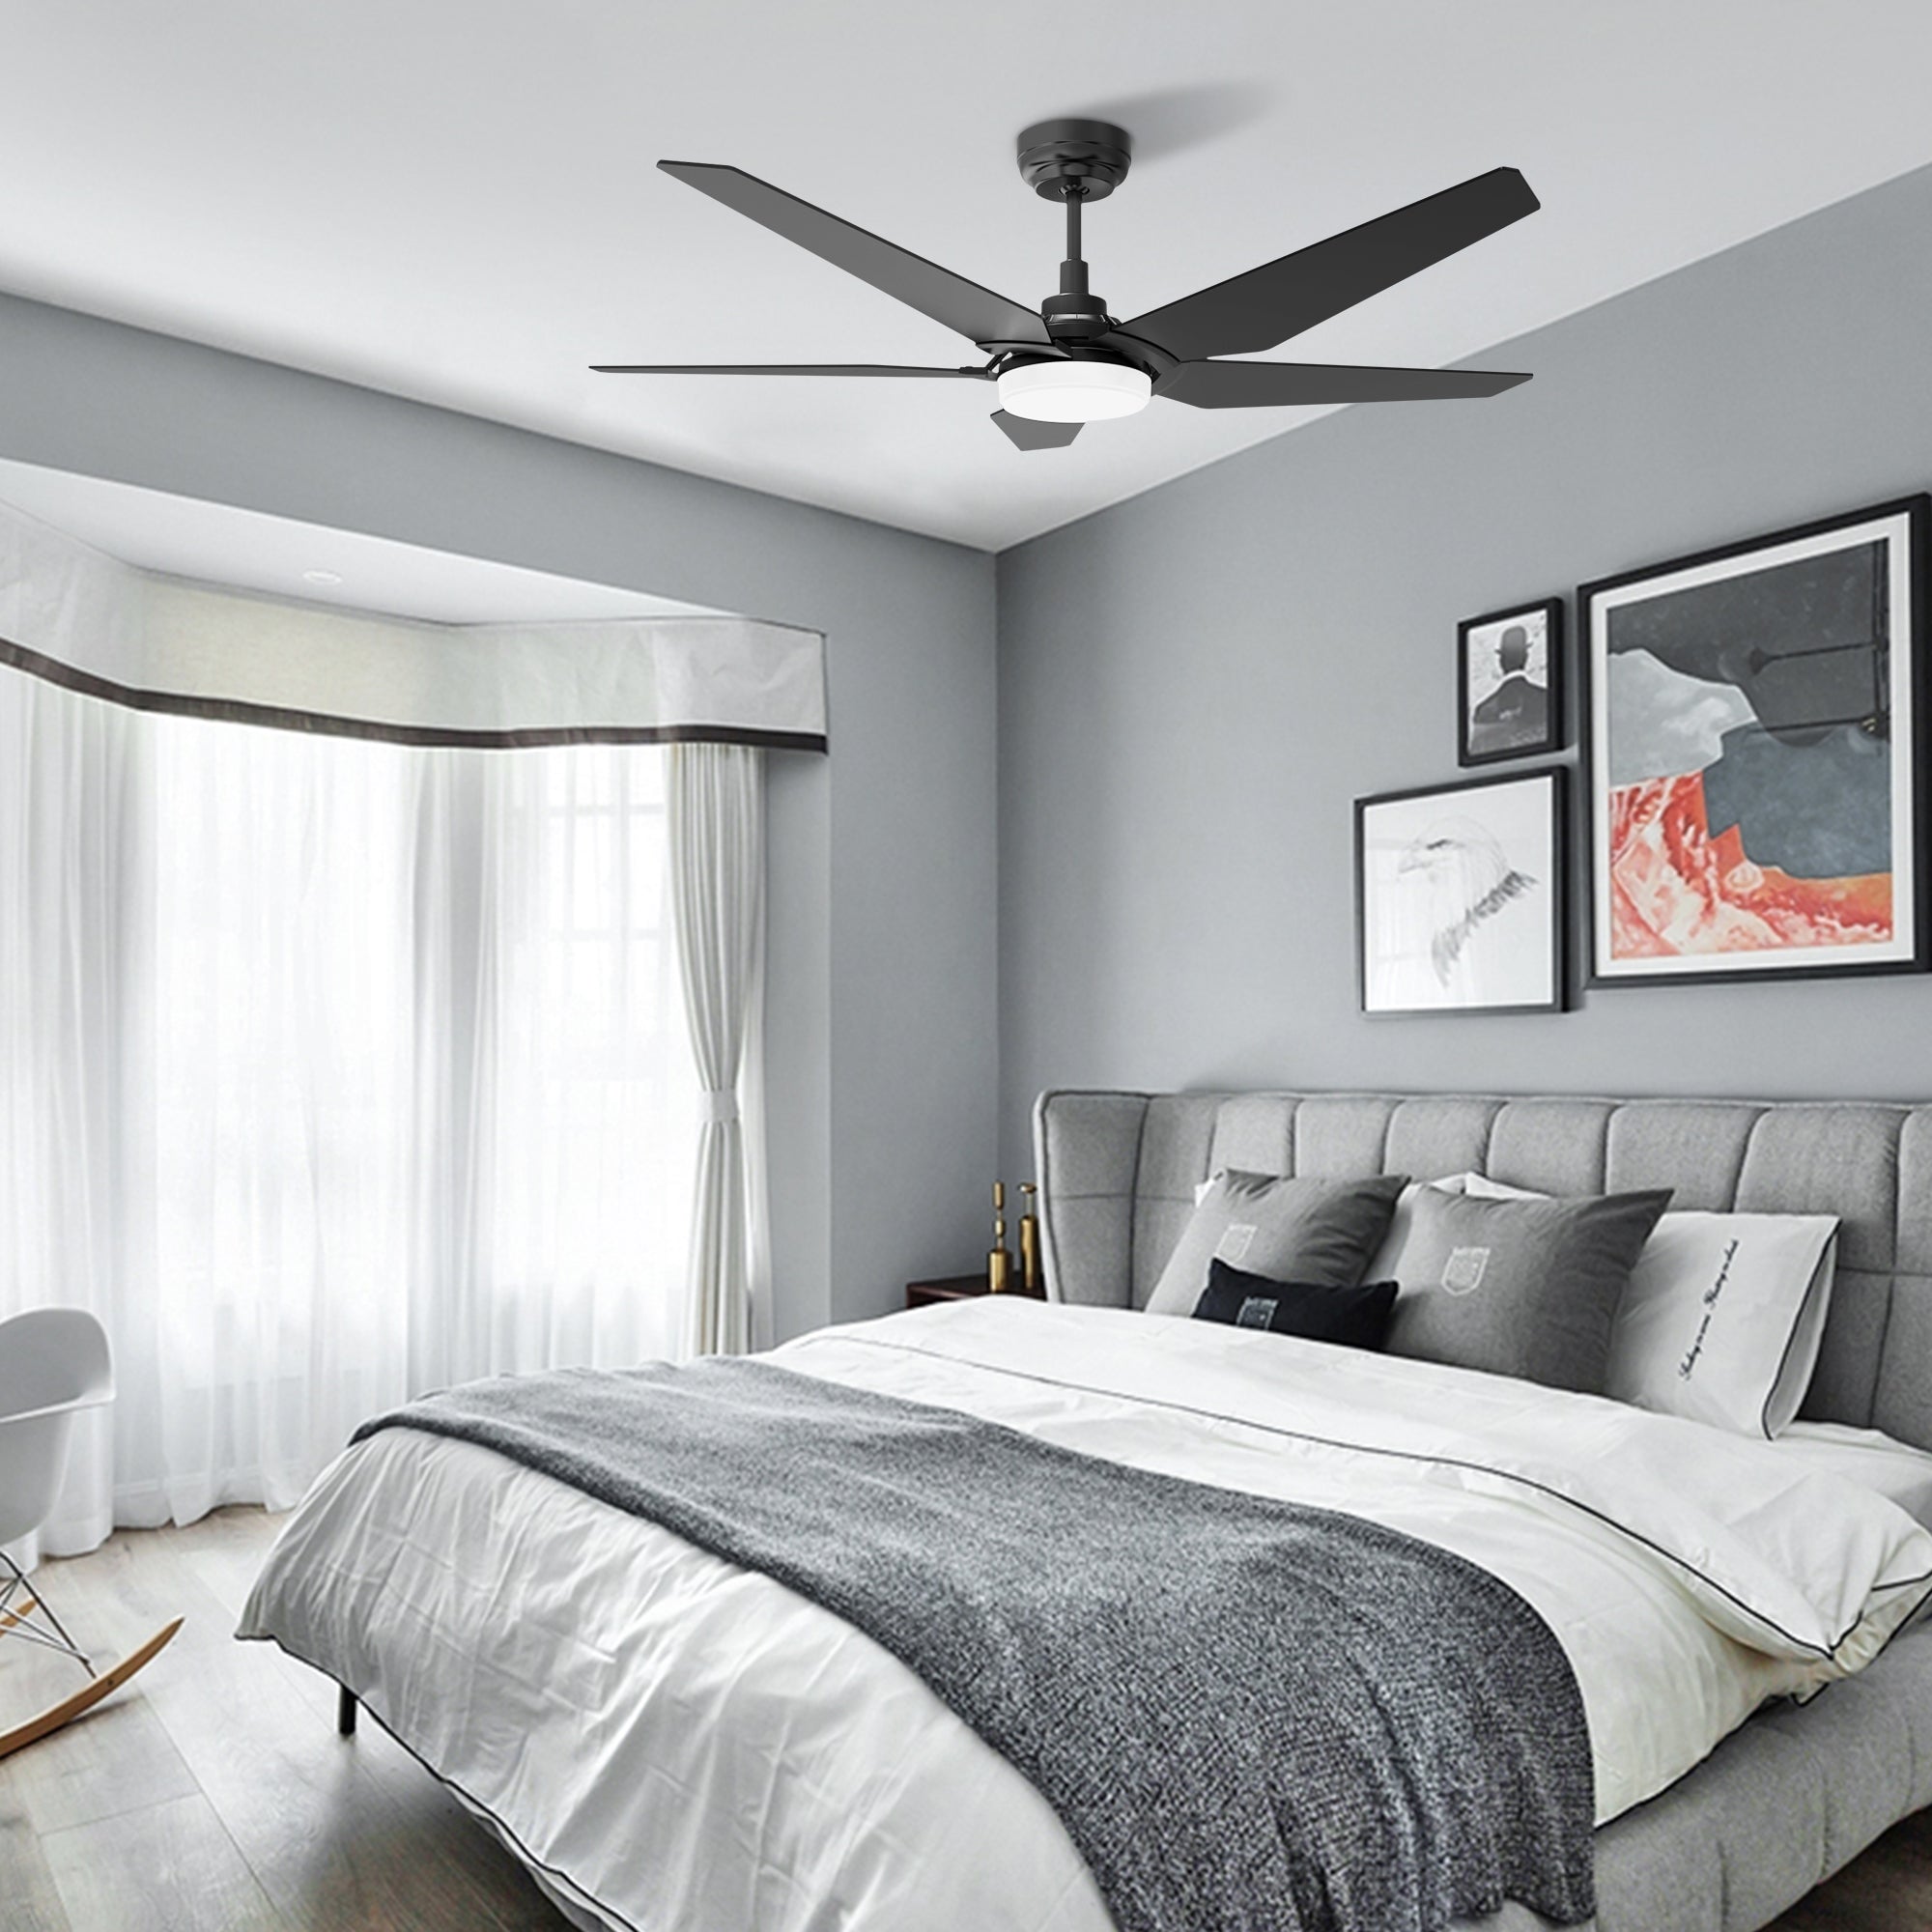 The Smafan Voyager 52&#39;&#39; smart ceiling fan keeps your space cool, bright, and stylish. It is a soft modern masterpiece perfect for your large indoor living spaces. This Wifi smart ceiling fan is a simplicity designing with Black finish, use elegant Plywood blades, Glass shade and has an integrated 4000K LED daylight. The fan features Remote control, Wi-Fi apps, Siri Shortcut and Voice control technology (compatible with Amazon Alexa and Google Home Assistant ) to set fan preferences.